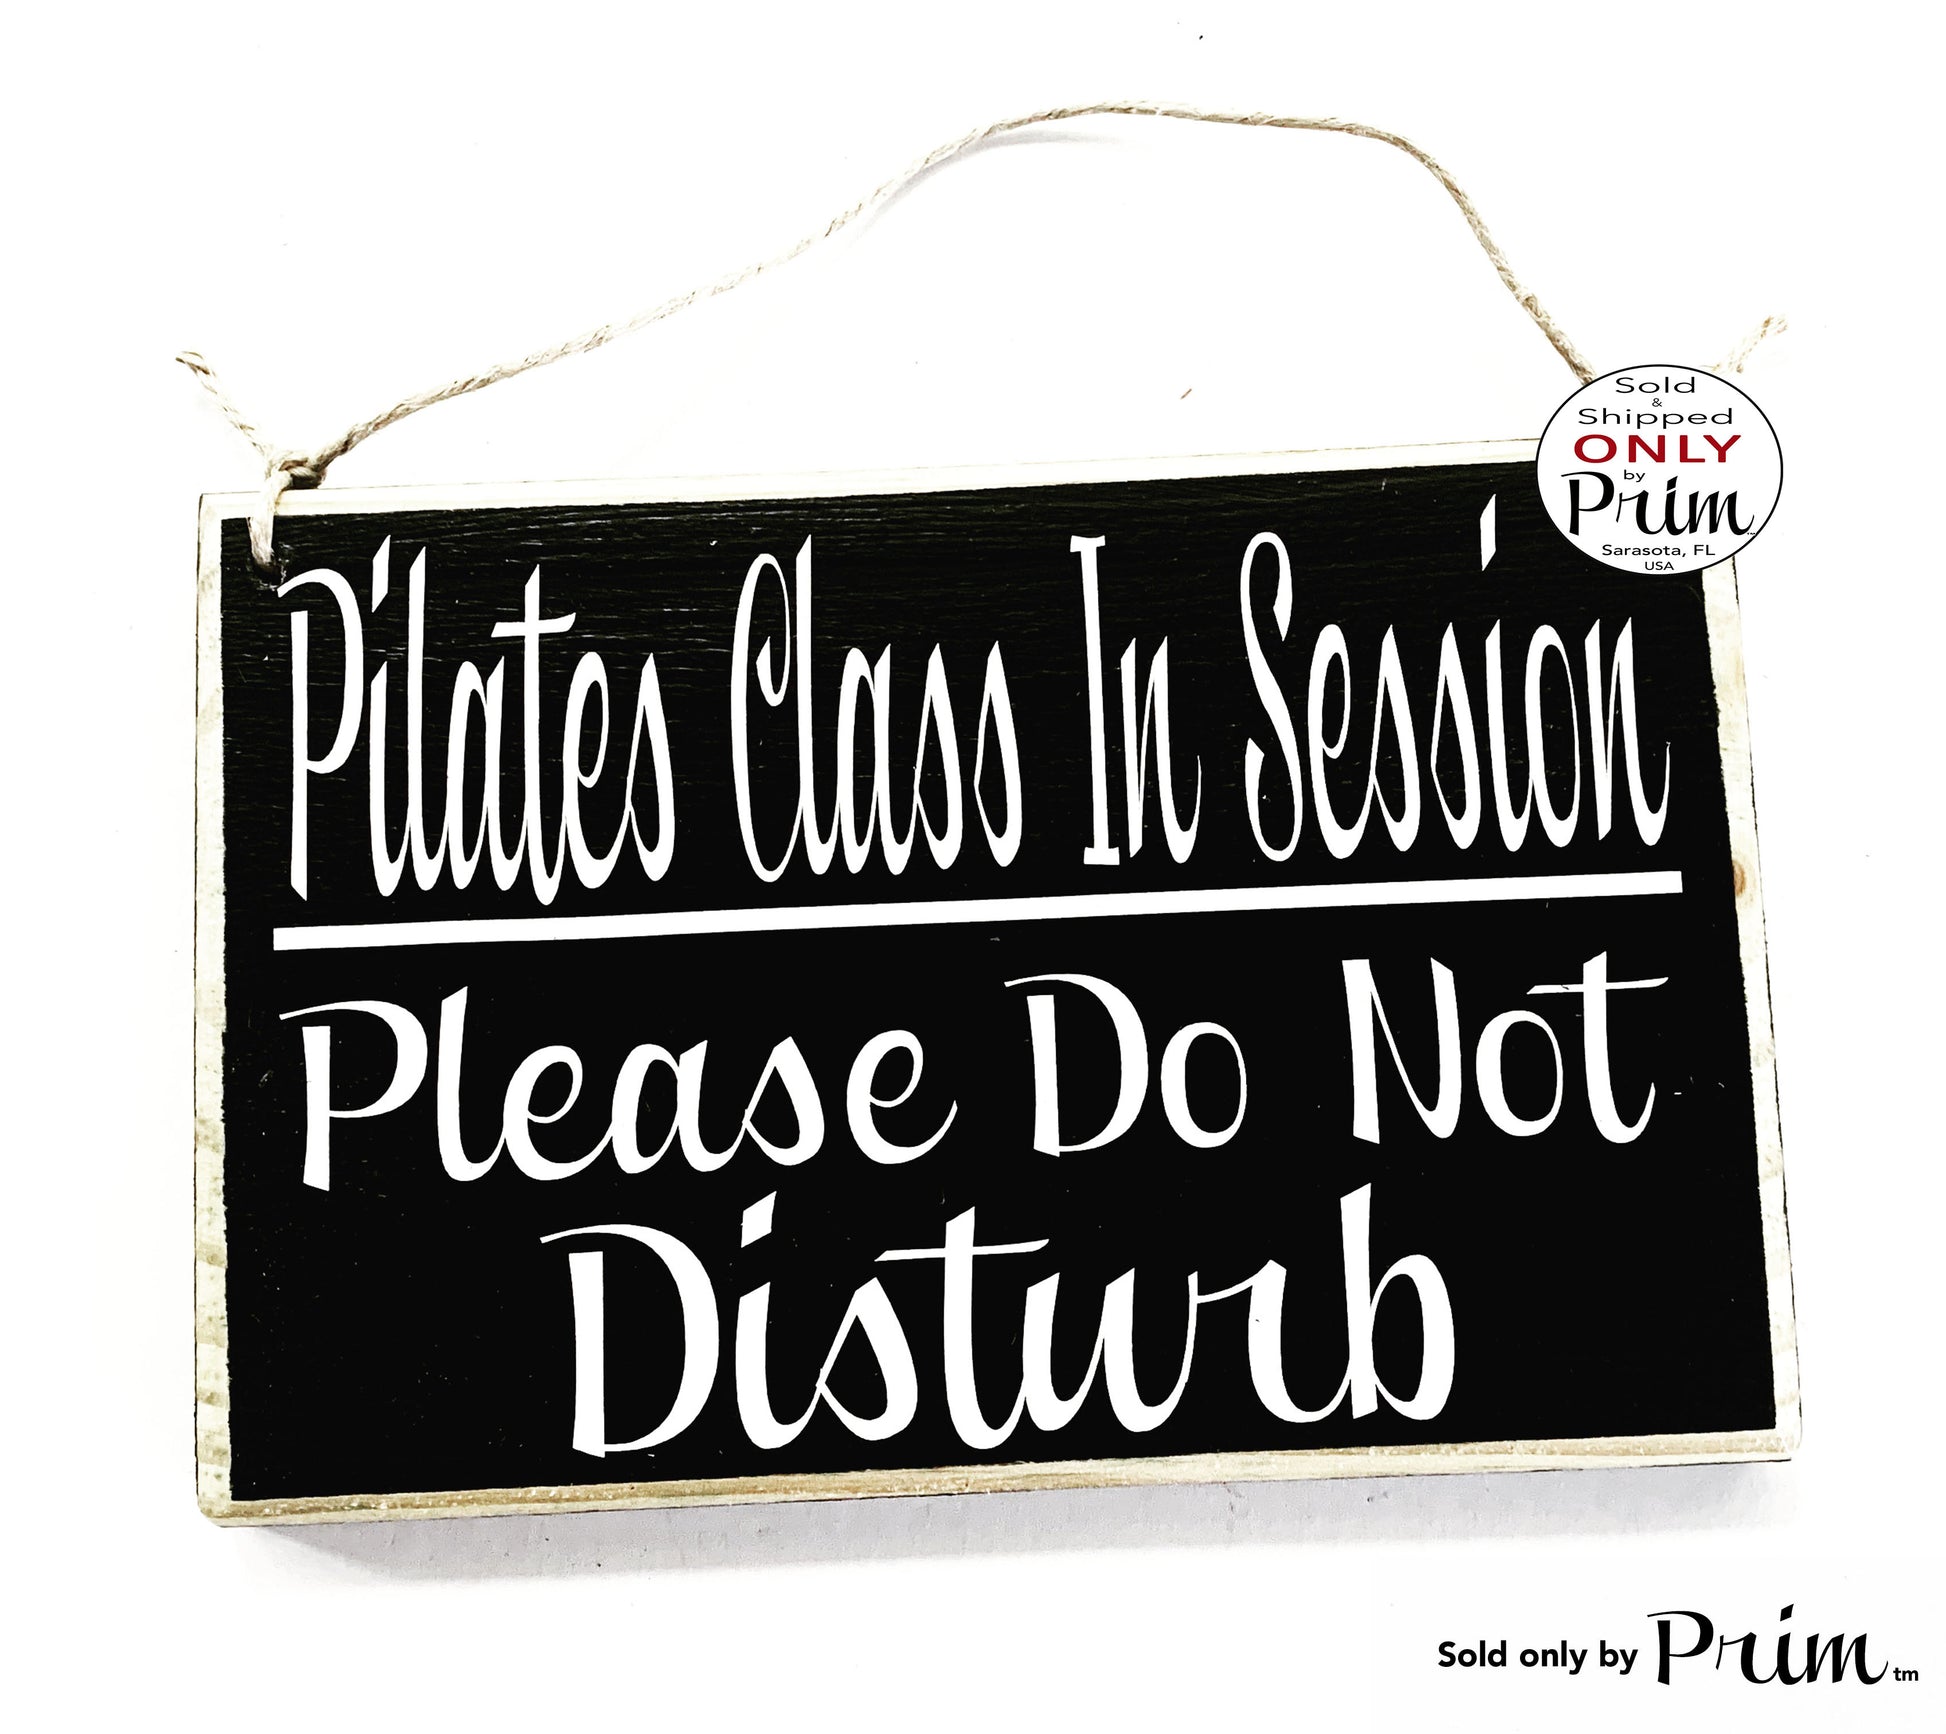 8x6 Pilates Class In Session Please Do Not Disturb Custom Wood Sign | Fitness Yoga Namaste Relaxation Door Plaque Designs by Prim